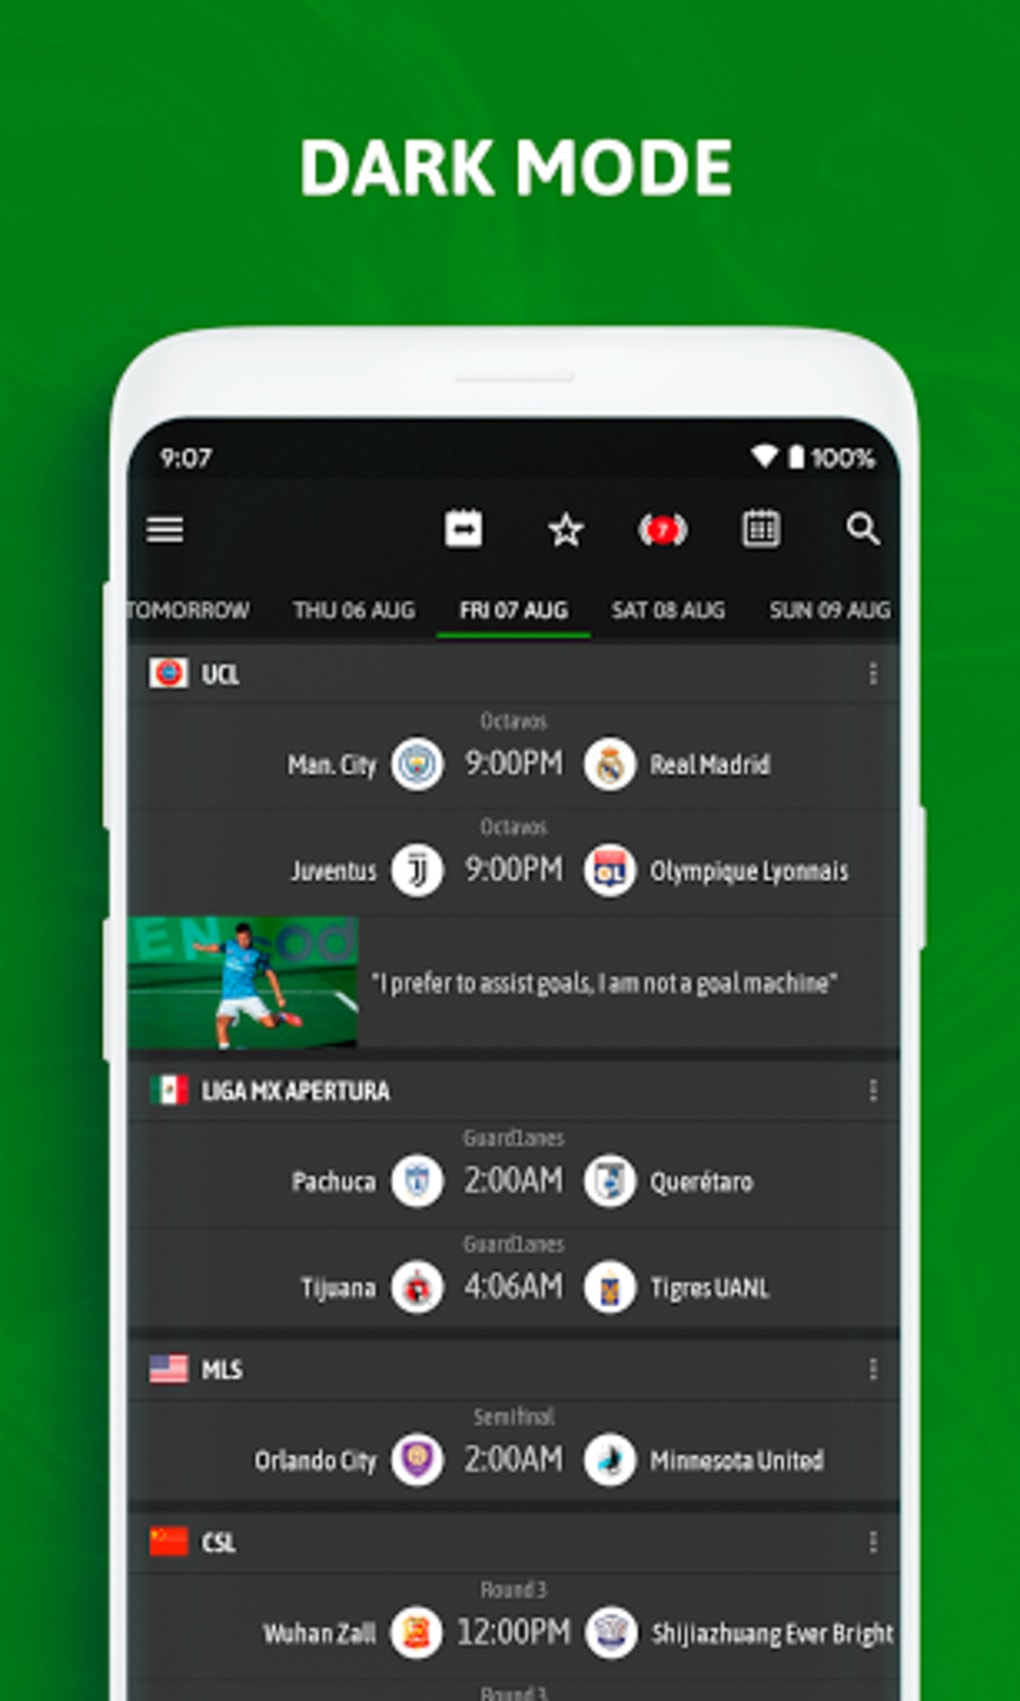 BeSoccer - Soccer Live Score APK for Android